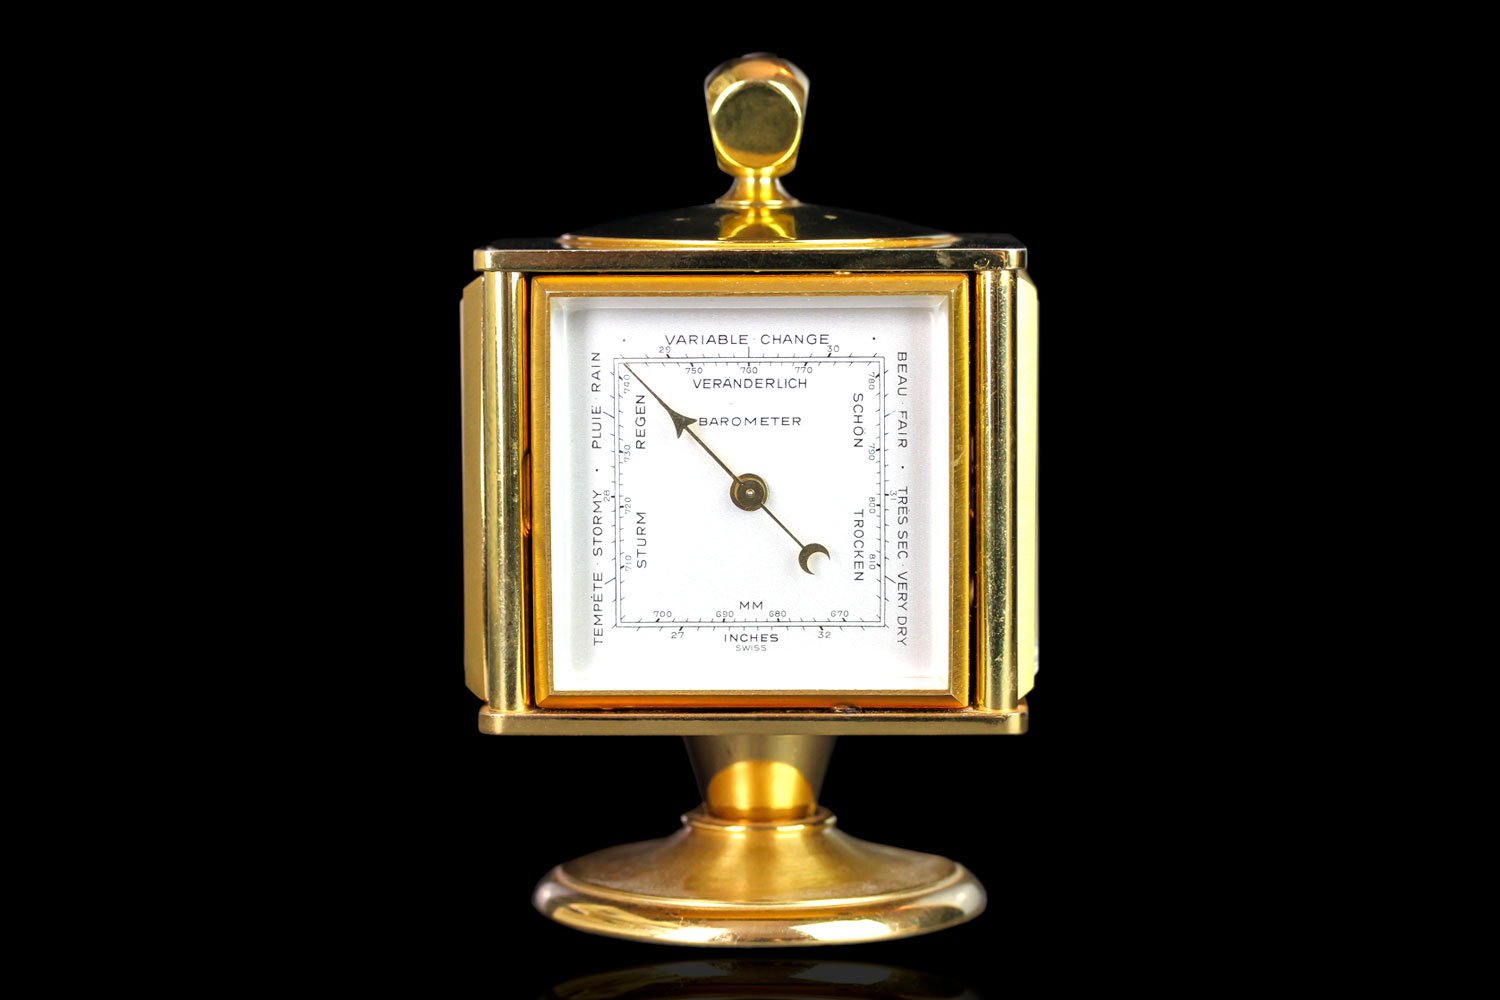 IMHOF Swiss desk clock, four sides with Time, Hygrometer, Barometer and Thermometer, gilt case - Image 3 of 7